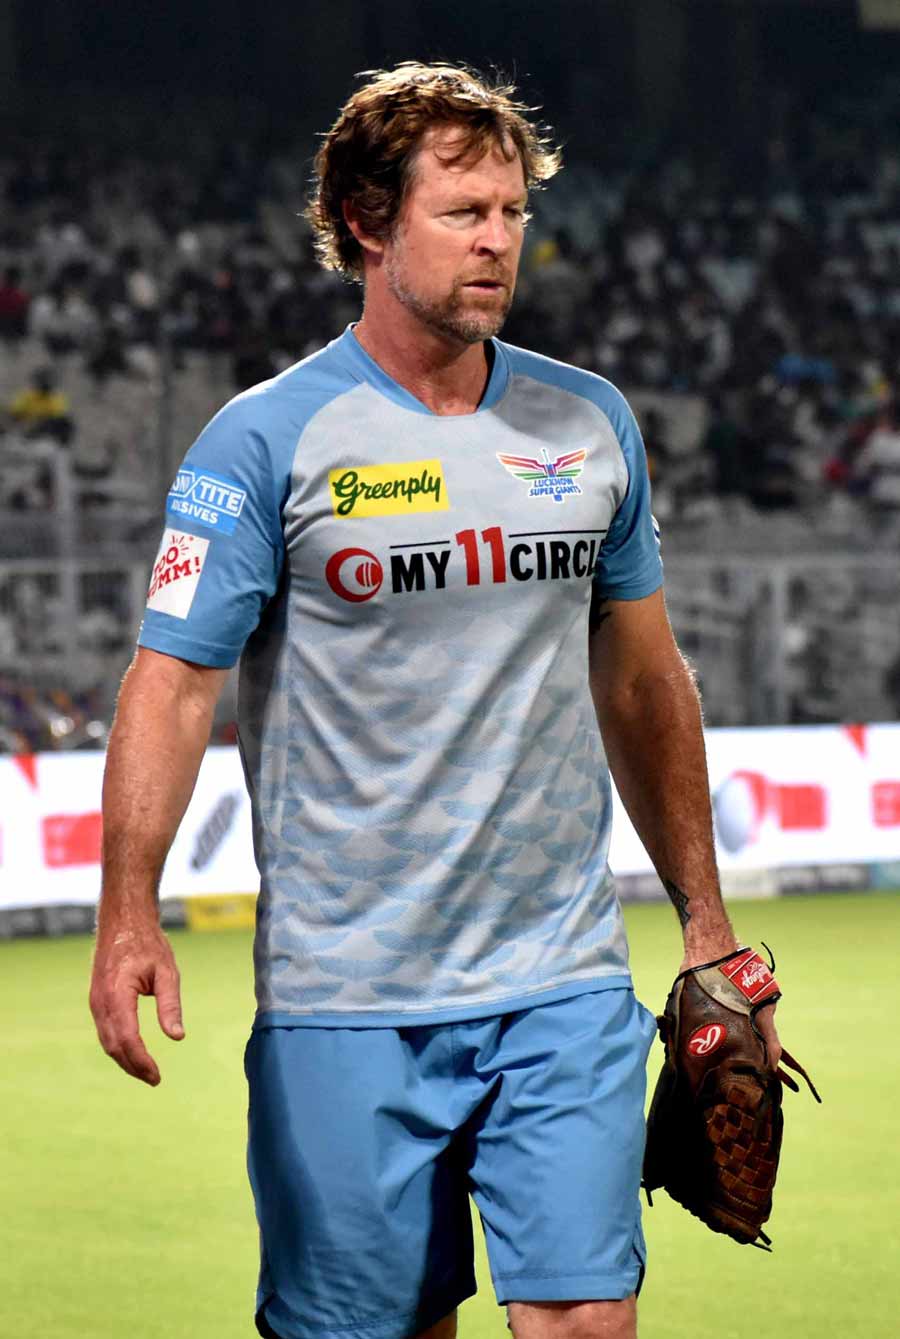 LSG’s fielding coach Jonty Rhodes at the nets at Eden Gardens ahead of the crucial tie on Saturday. KKR is in a tight spot. Even if they win this game, they will finish with 14 points. However, given their poor net run rate (NRR), they need to ensure they win by at least 103 runs and then hope RCB and MI to lose their final games and in case KKR lose this game against LSG, they definitely won't qualify for the play-offs